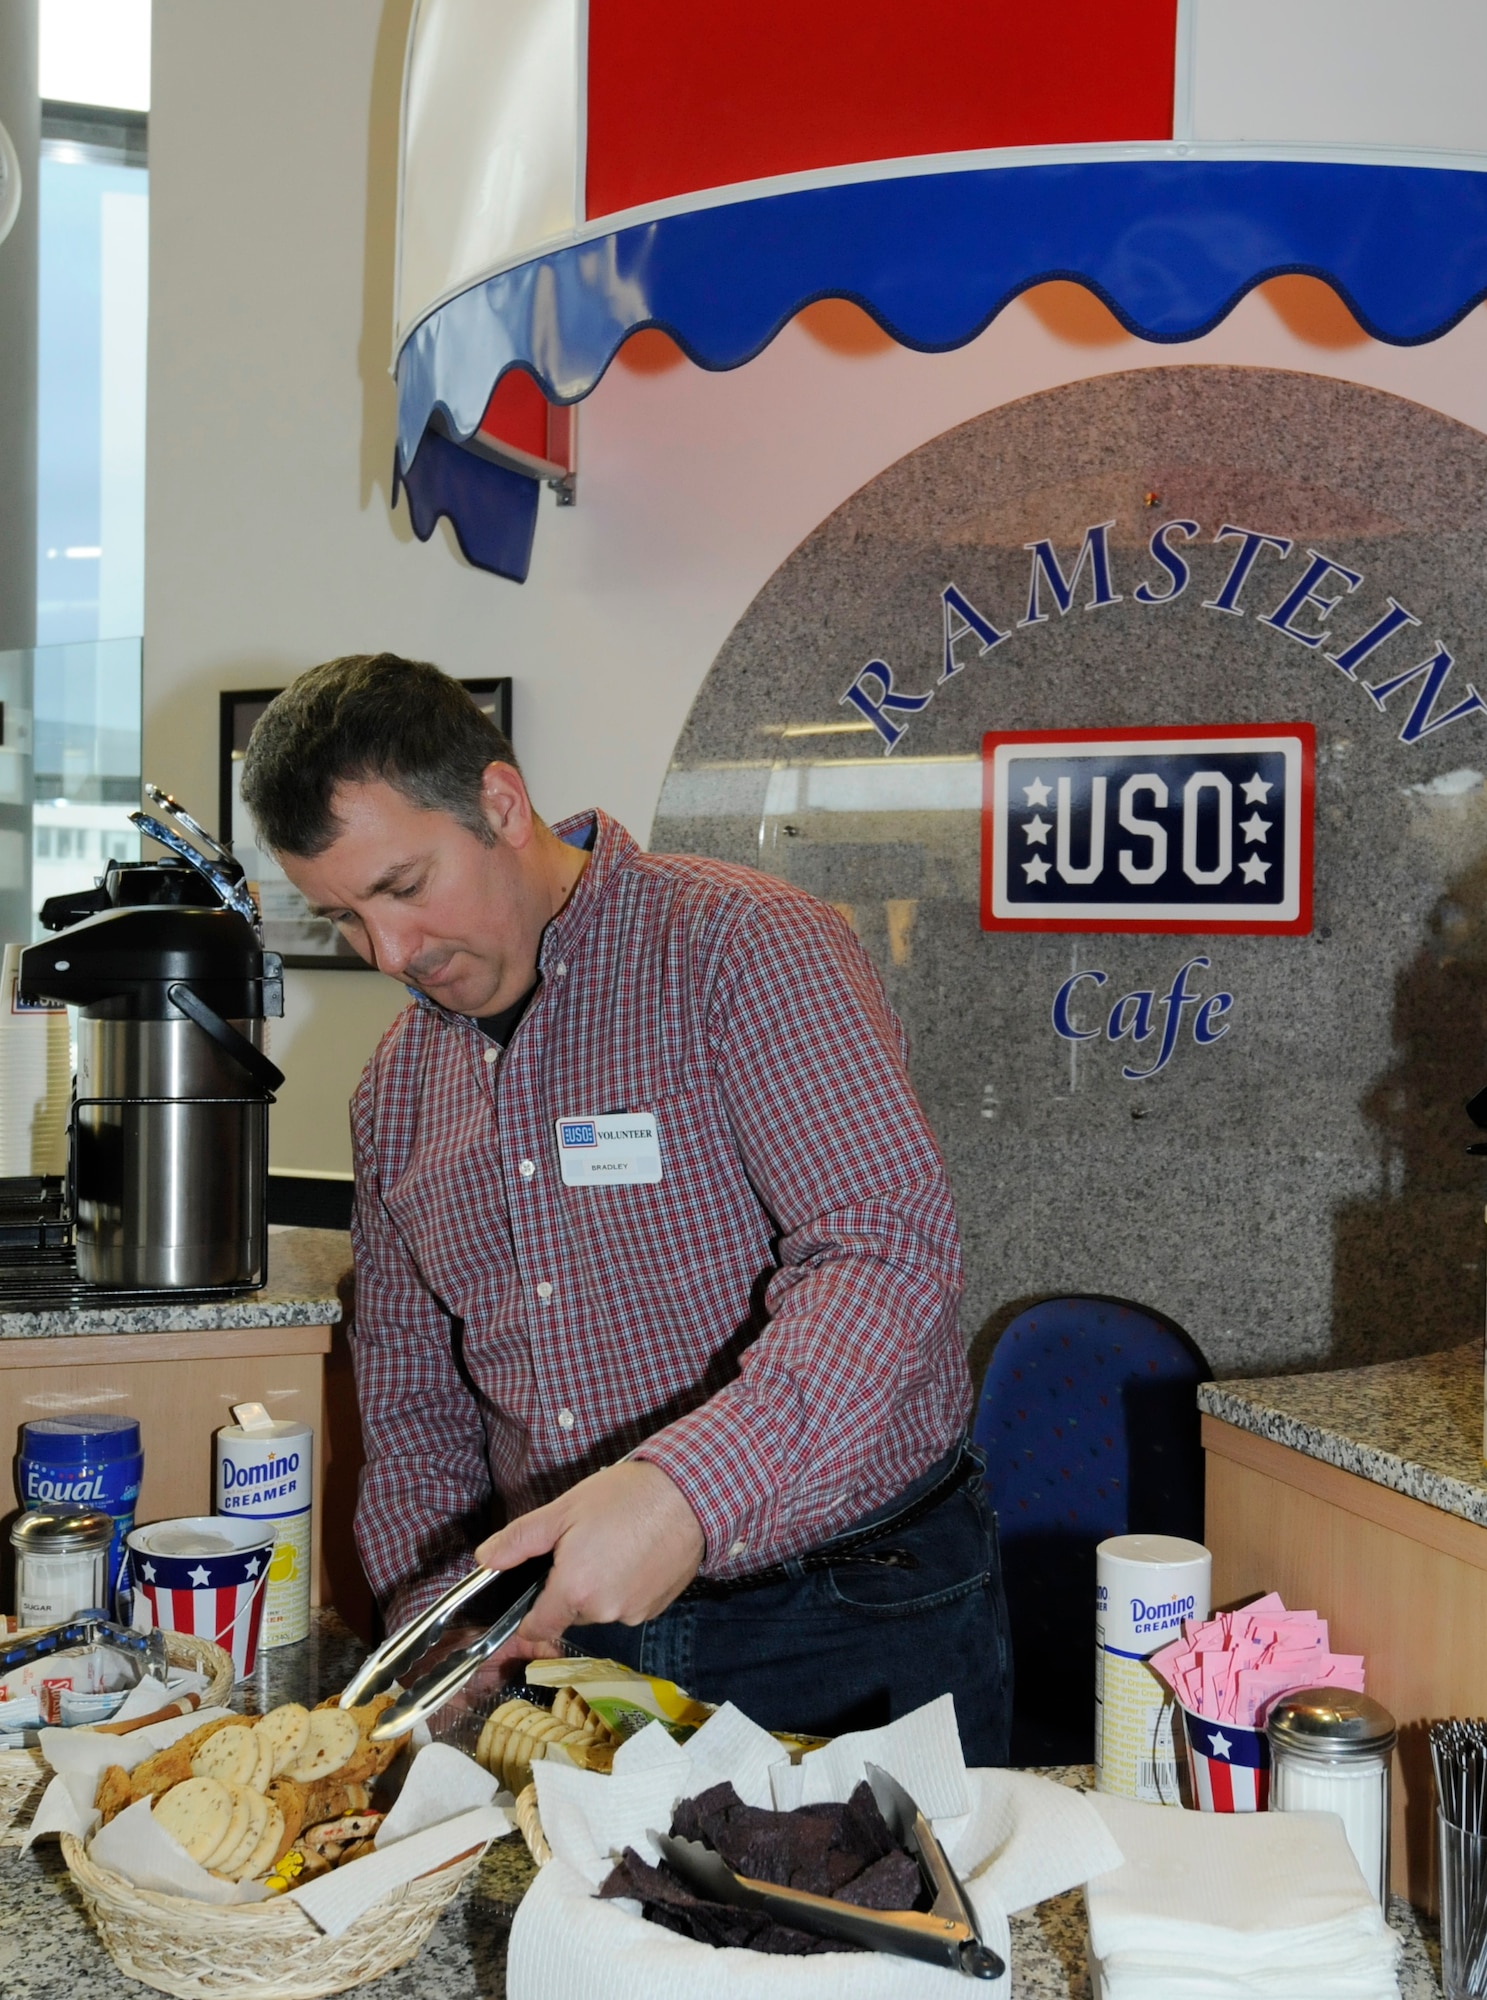 Retired U.S. Air Force Tech. Sgt. Bradley Wall restocks the United Service Organizations cafe located in the Ramstein Passenger Terminal, Ramstein Air Base, Germany, Feb. 4, 2011. Mr. Wall volunteers at the USO and Wounded Warrior Center weekly to give back to the military. (U.S. Air Force photo by Airman Kendra Alba)